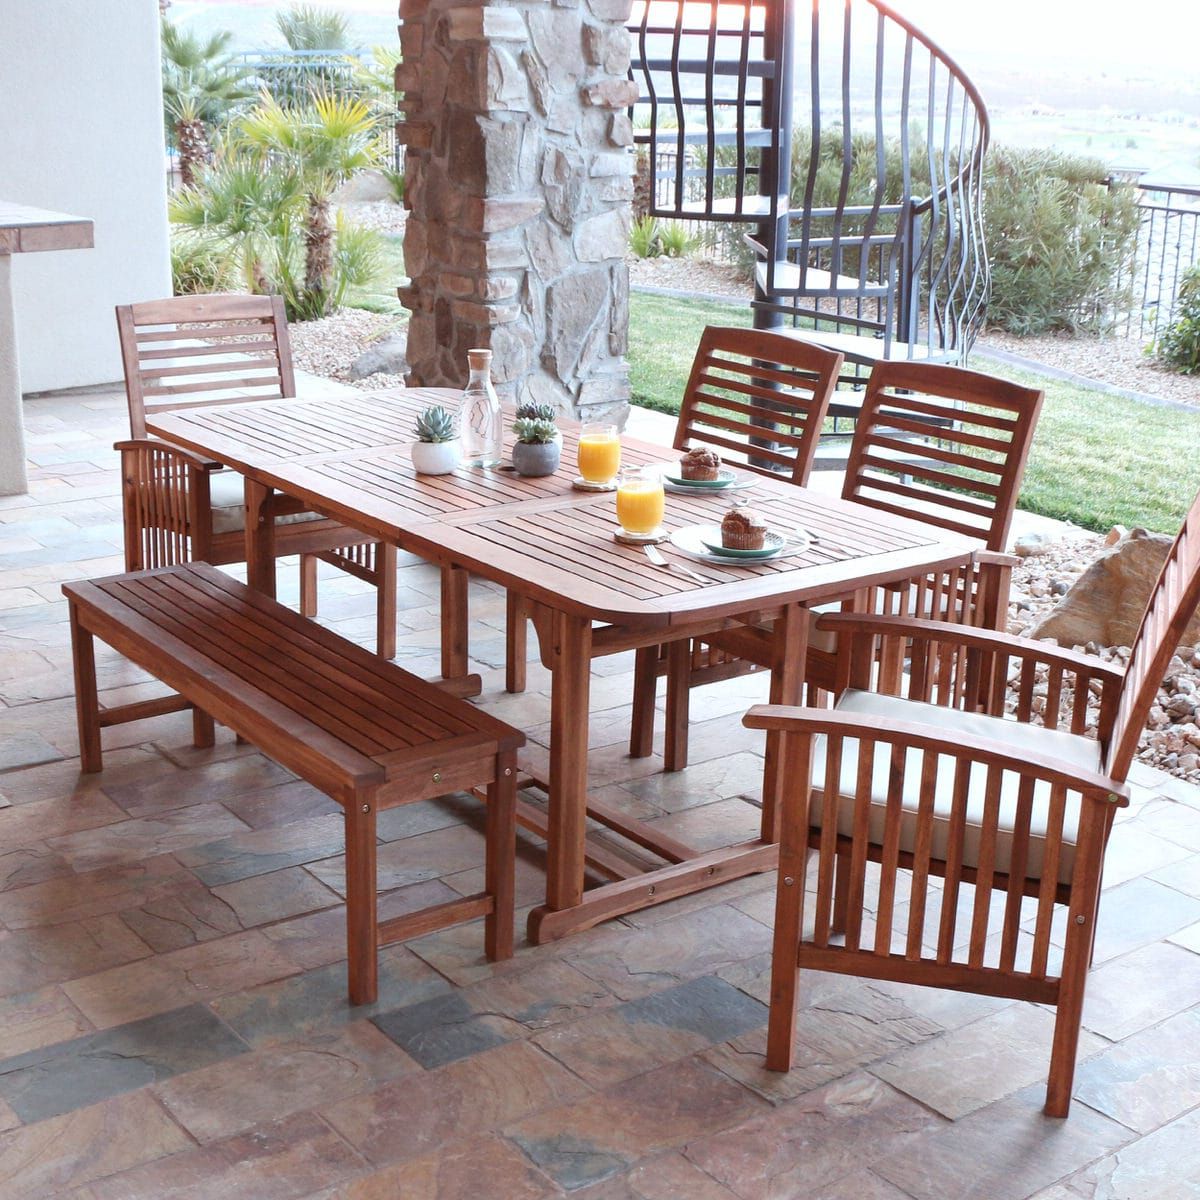 Brown Acacia Patio Dining Sets Inside Most Recent Midland 6 Piece Acacia Patio Dining Set W/ Cushions – Brownwalker (View 14 of 15)